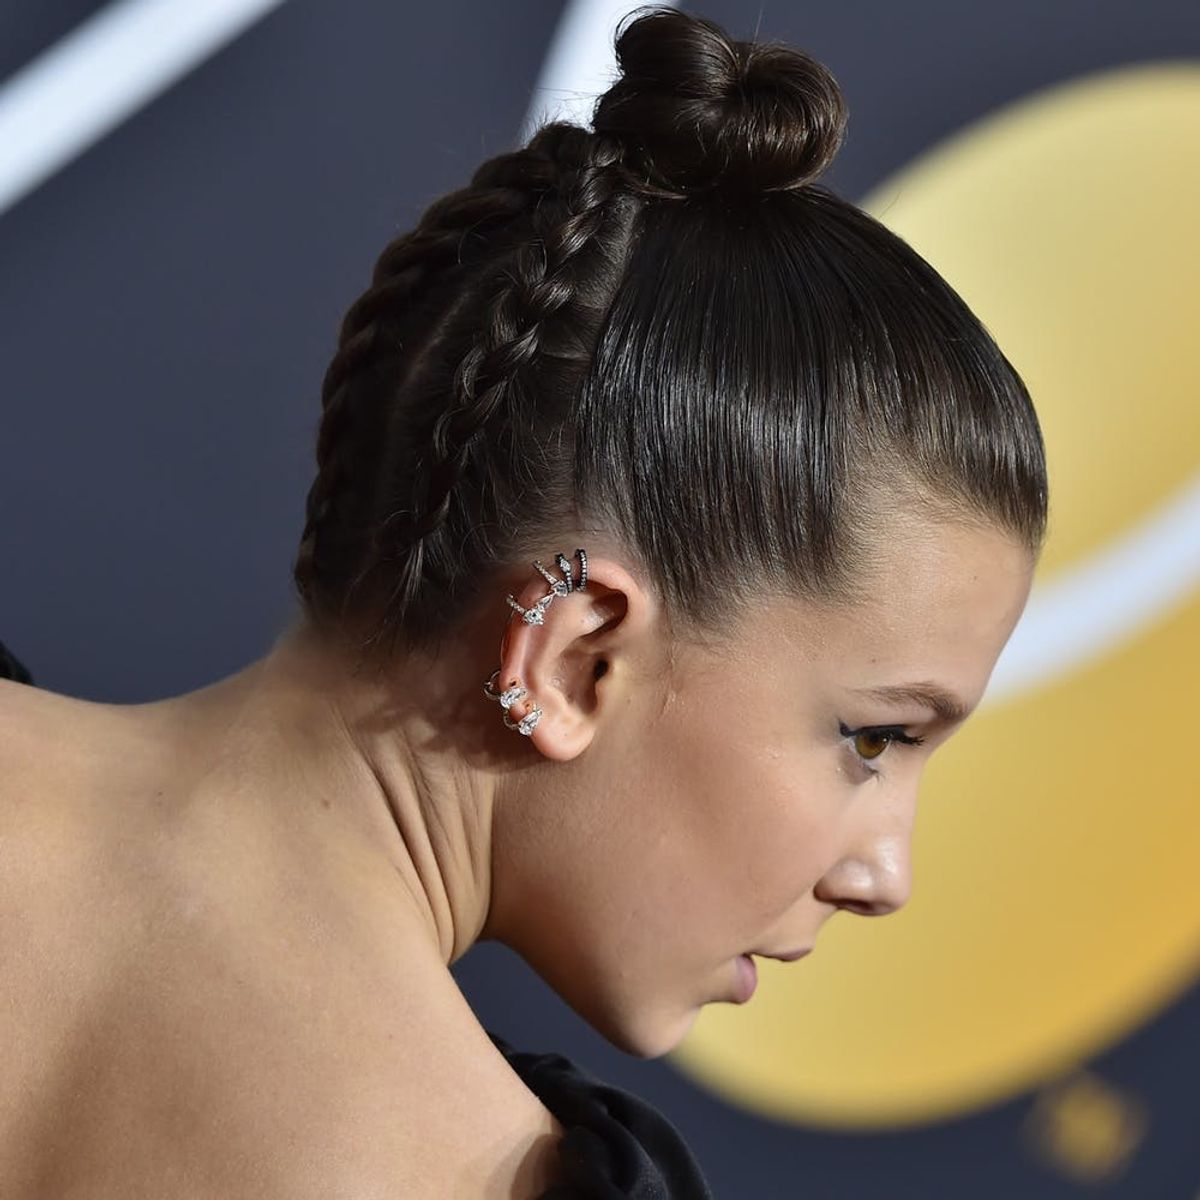 11 Celebrity Braided Hairstyles Too Damn Good Not to Copy